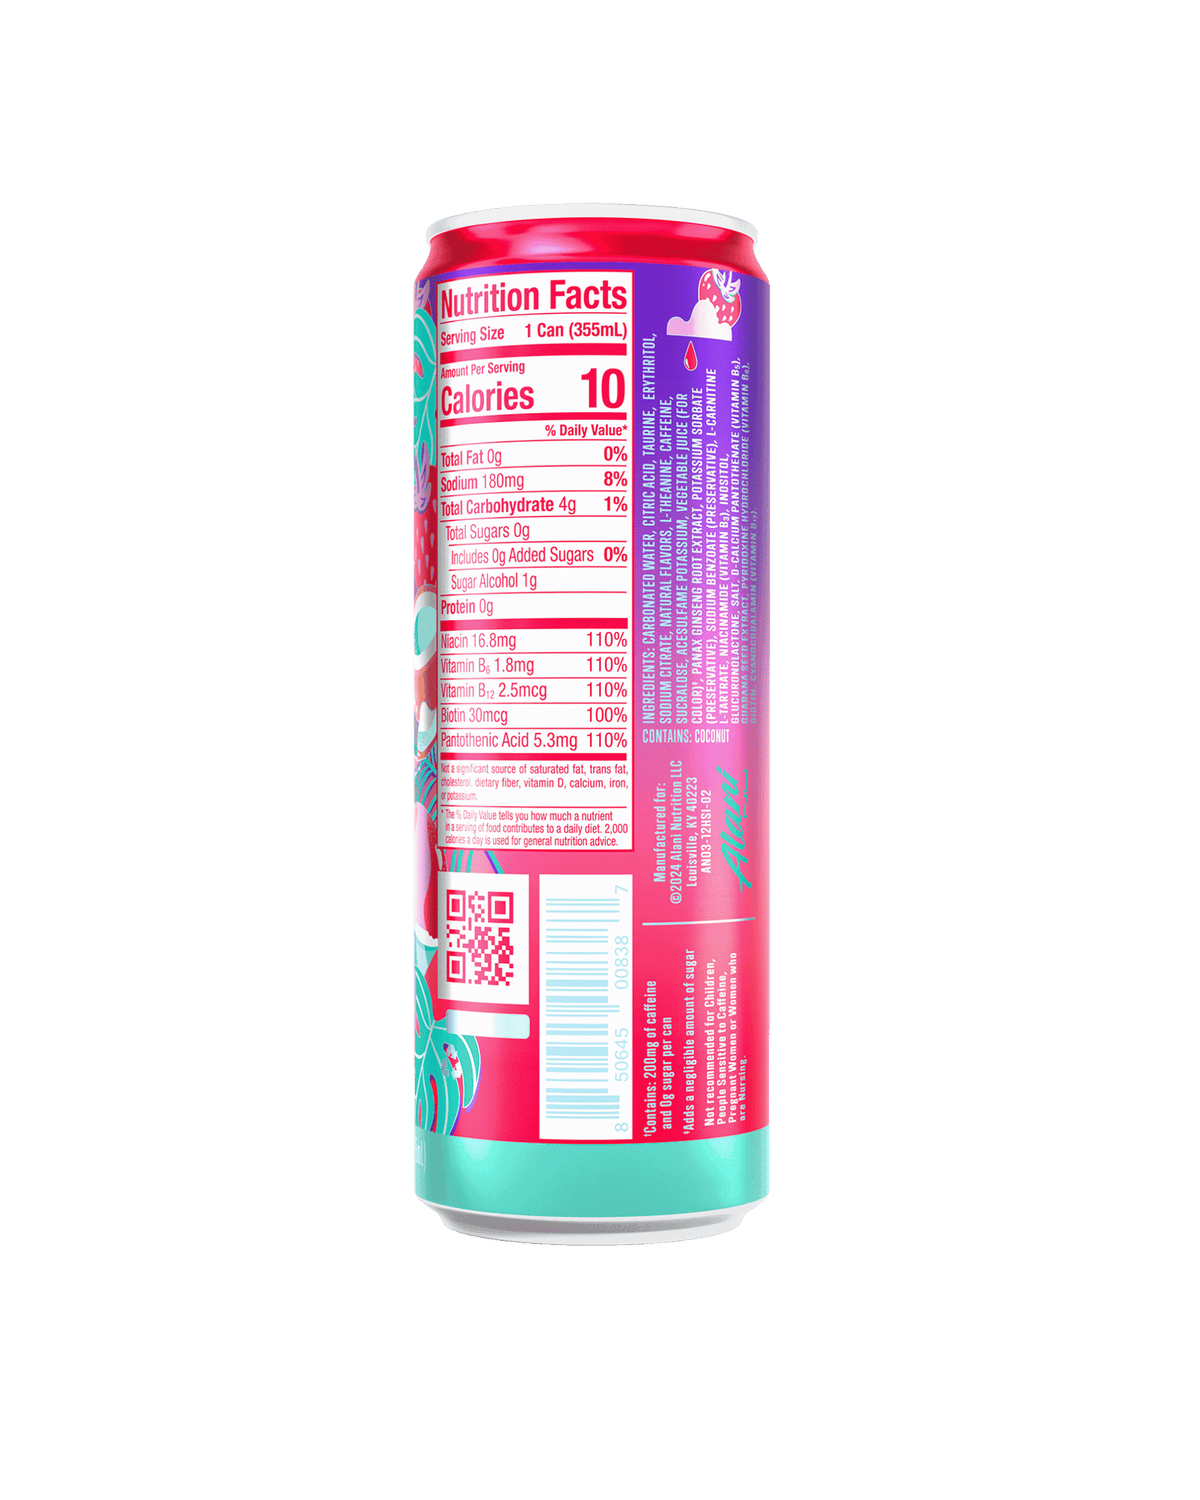 The back view of an Alani Nu Hawaiian Shaved Ice Energy Drink can, highlighting nutrition facts.​ 